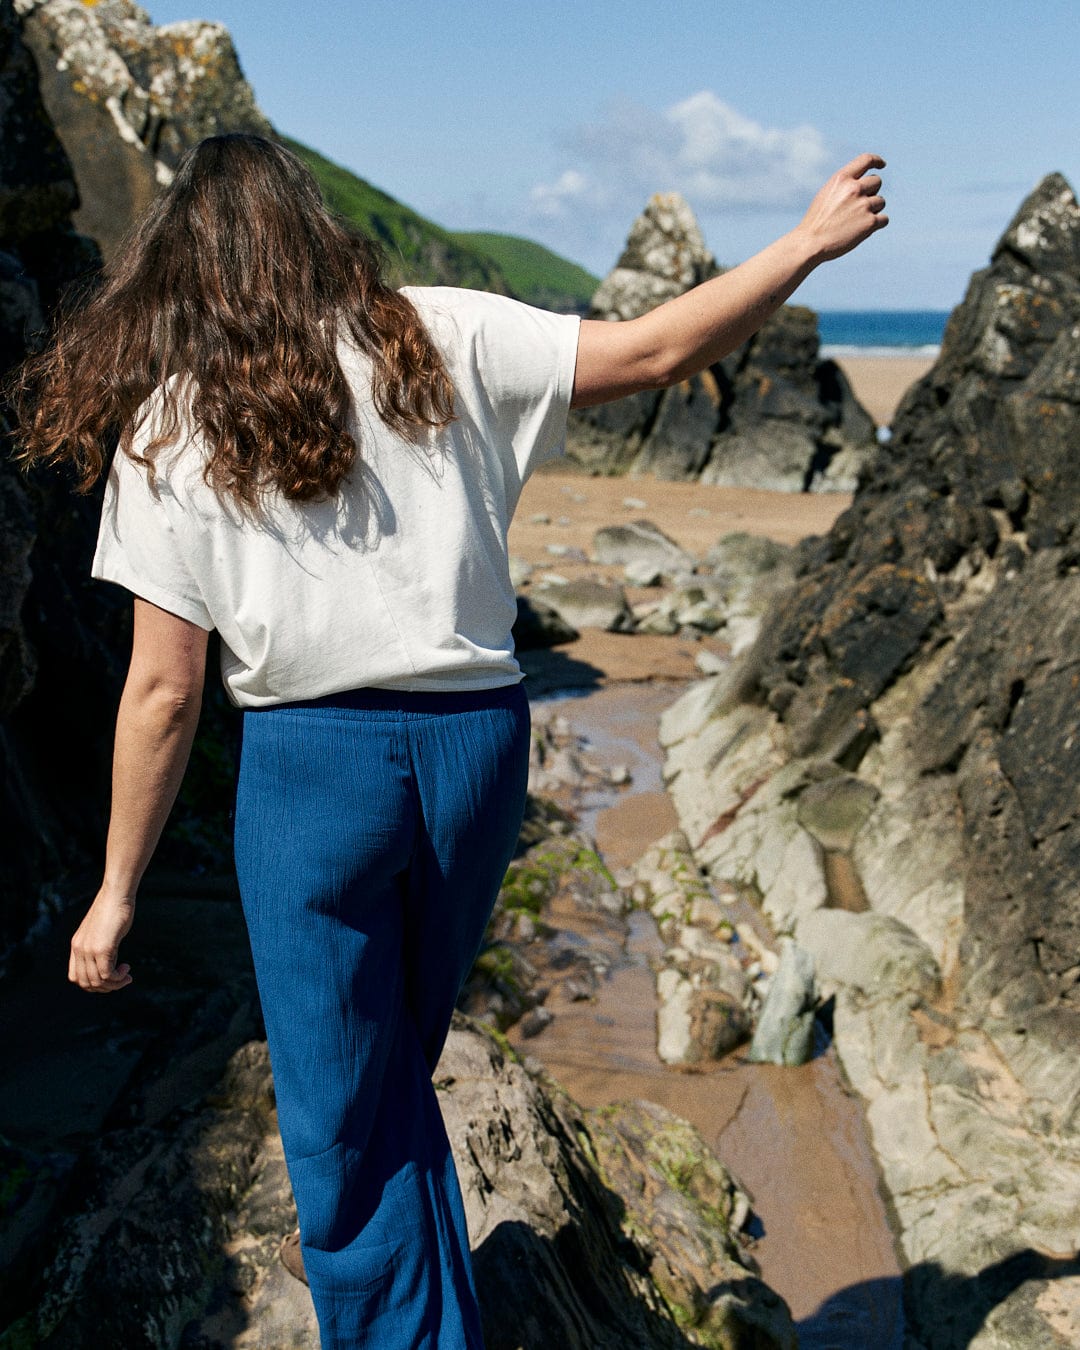 A person with long hair, clad in a loose fit white Saltrock Love Your Ocean - Recycled Womens T-Shirt - White and blue pants made from recycled material, is seen from behind while walking on rocks near a sandy beach with green hills in the background. A reminder to "Love Your Ocean" drifts in the salty breeze.